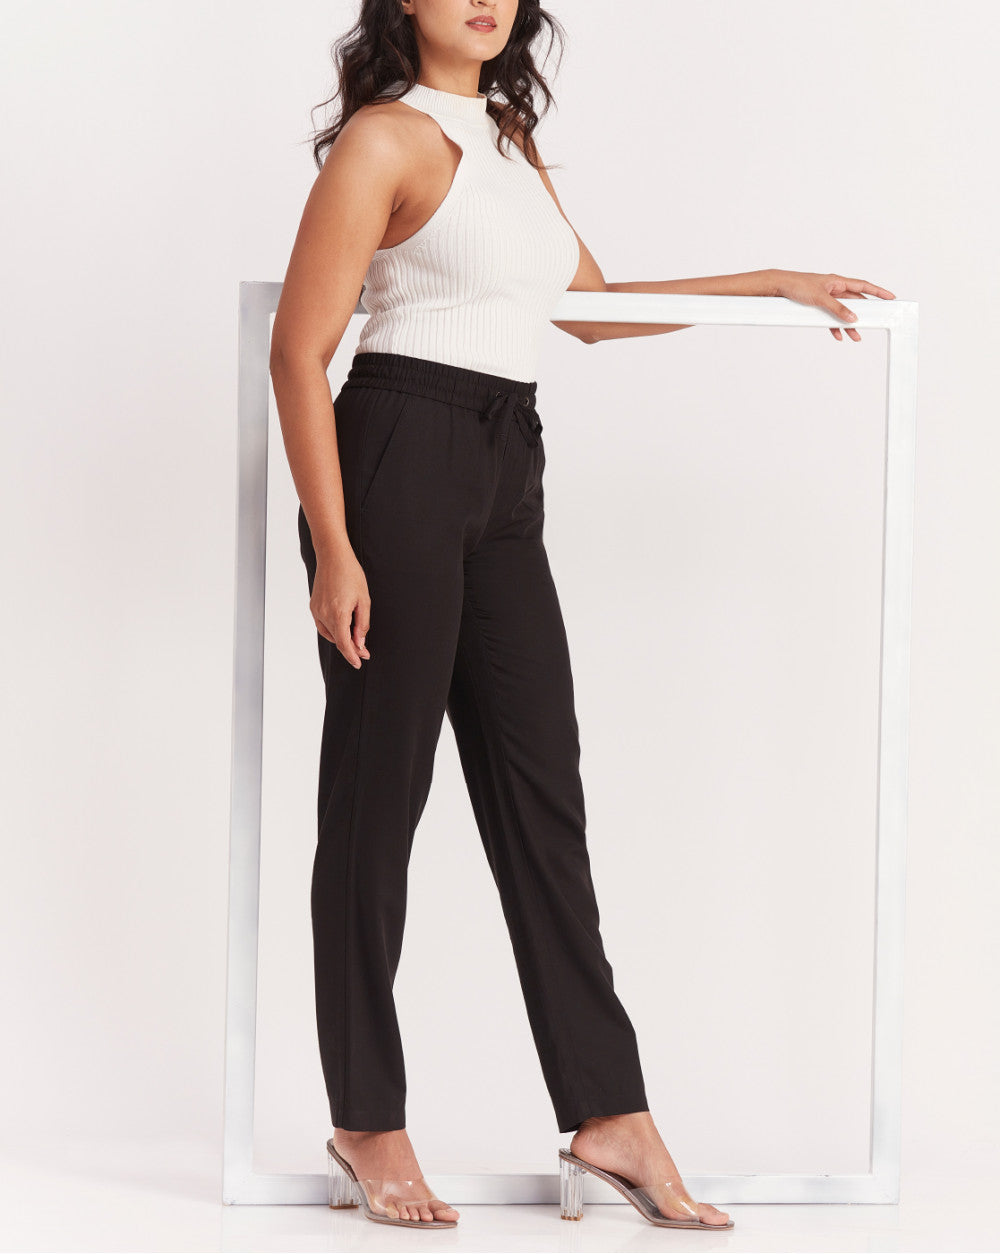 Tapered &amp; Relaxed Fit Drawstring Pants - Jet Black